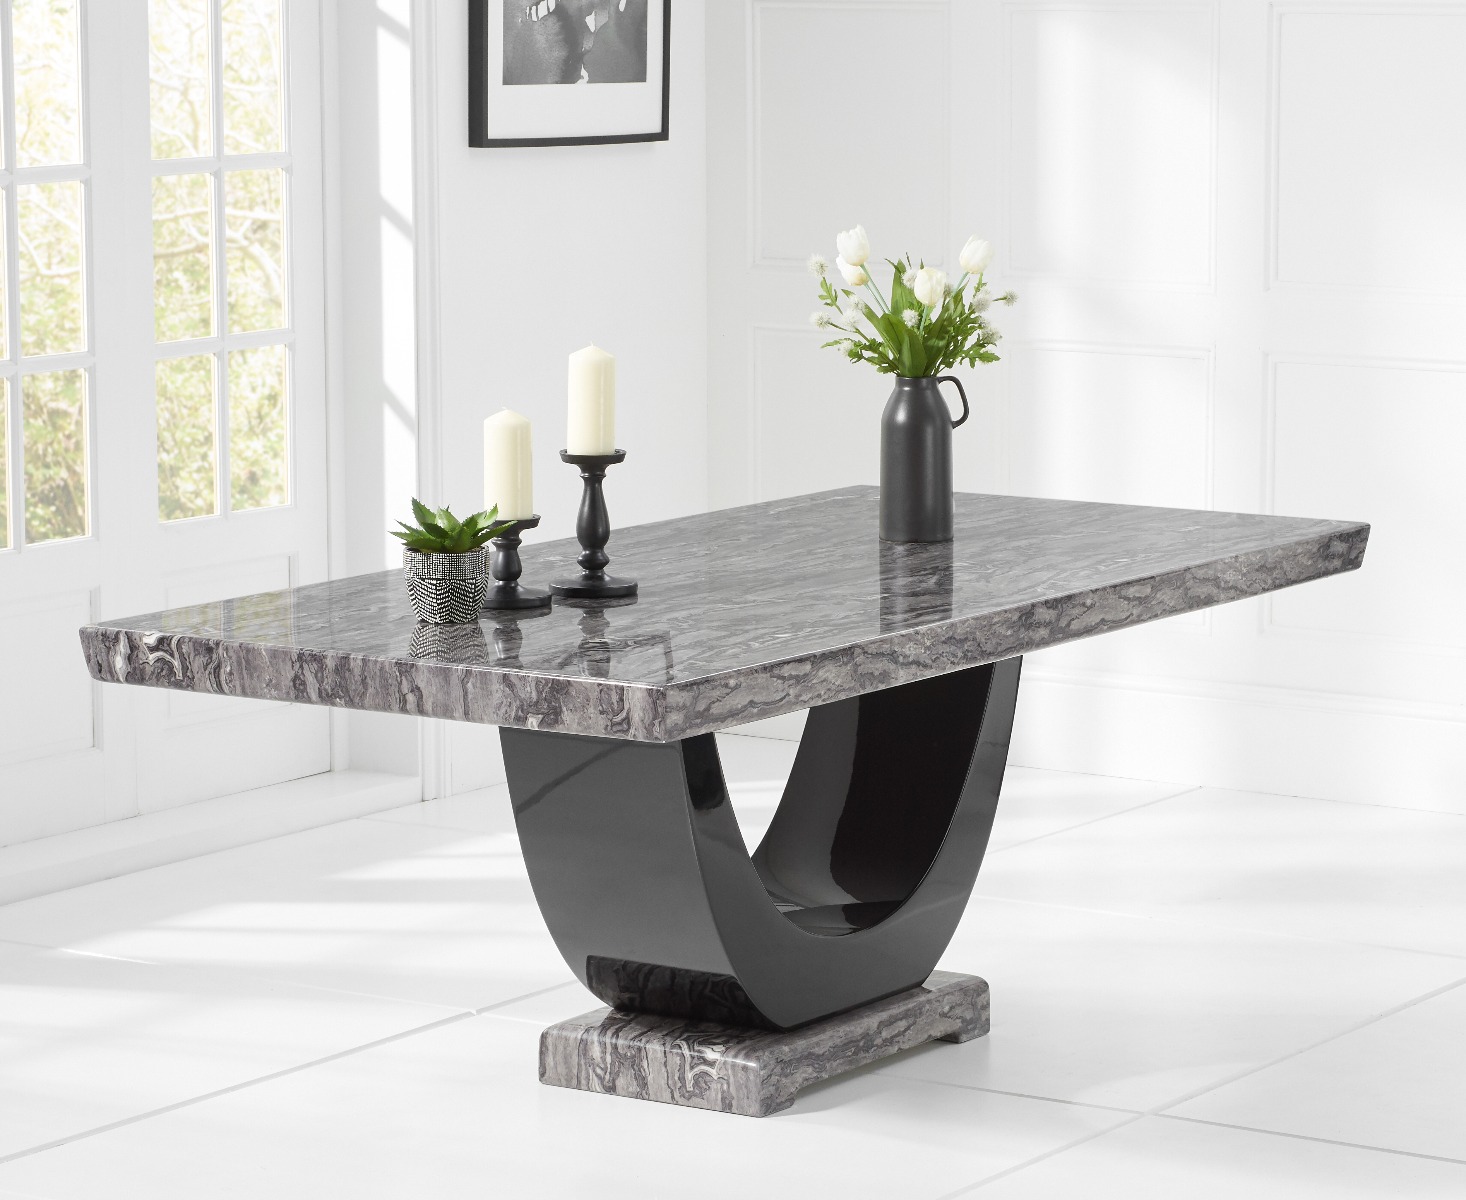 Photo 2 of Raphael 170cm dark grey pedestal marble dining table with 6 grey sophia chairs